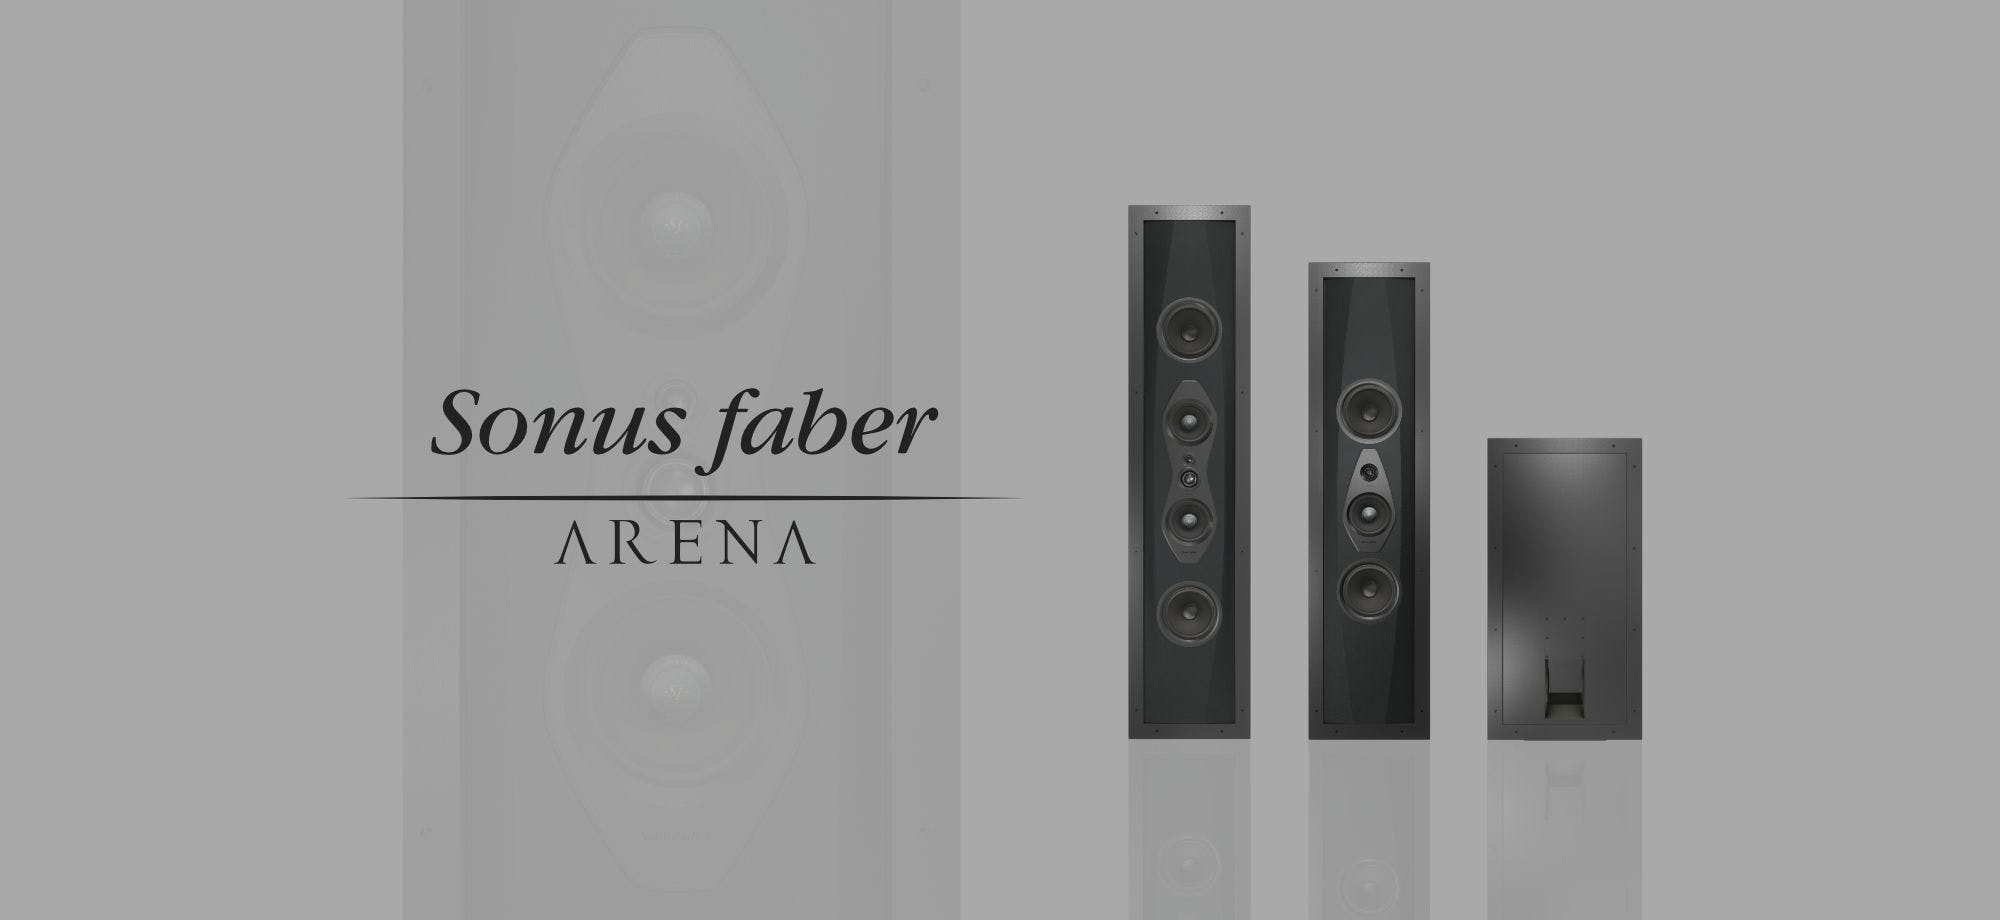 World debut for Sonus faber’s Arena at CEDIA 2022 copy